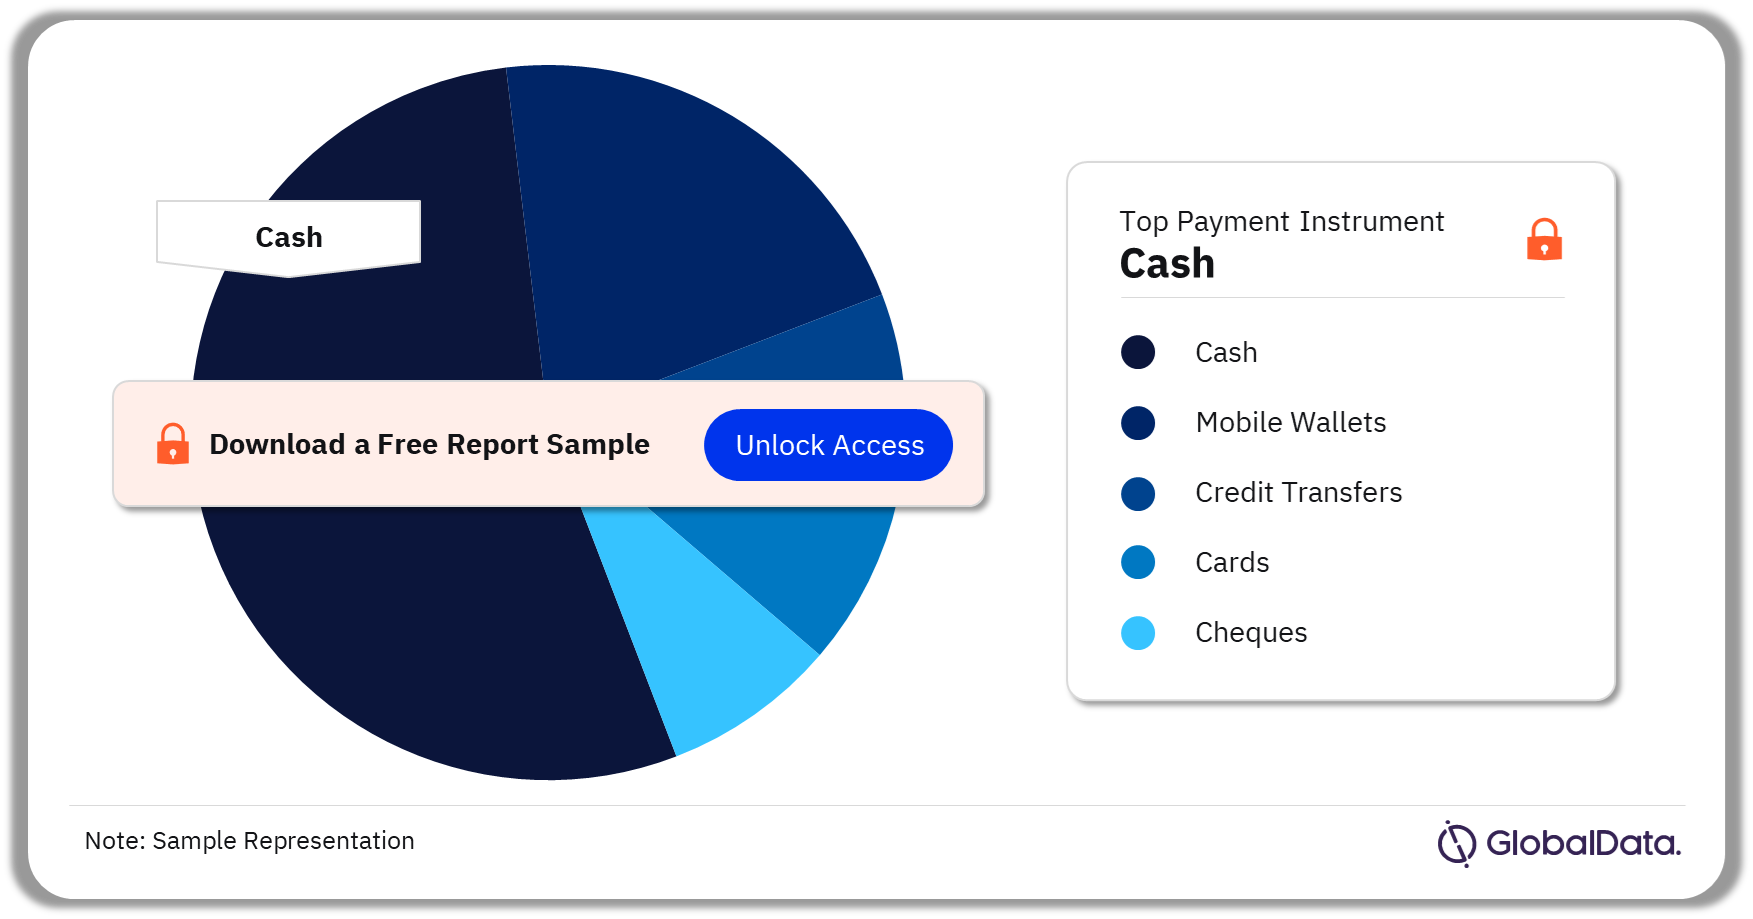 Philippines Cards and Payments Market Analysis by Payment Instruments, 2023 (%)